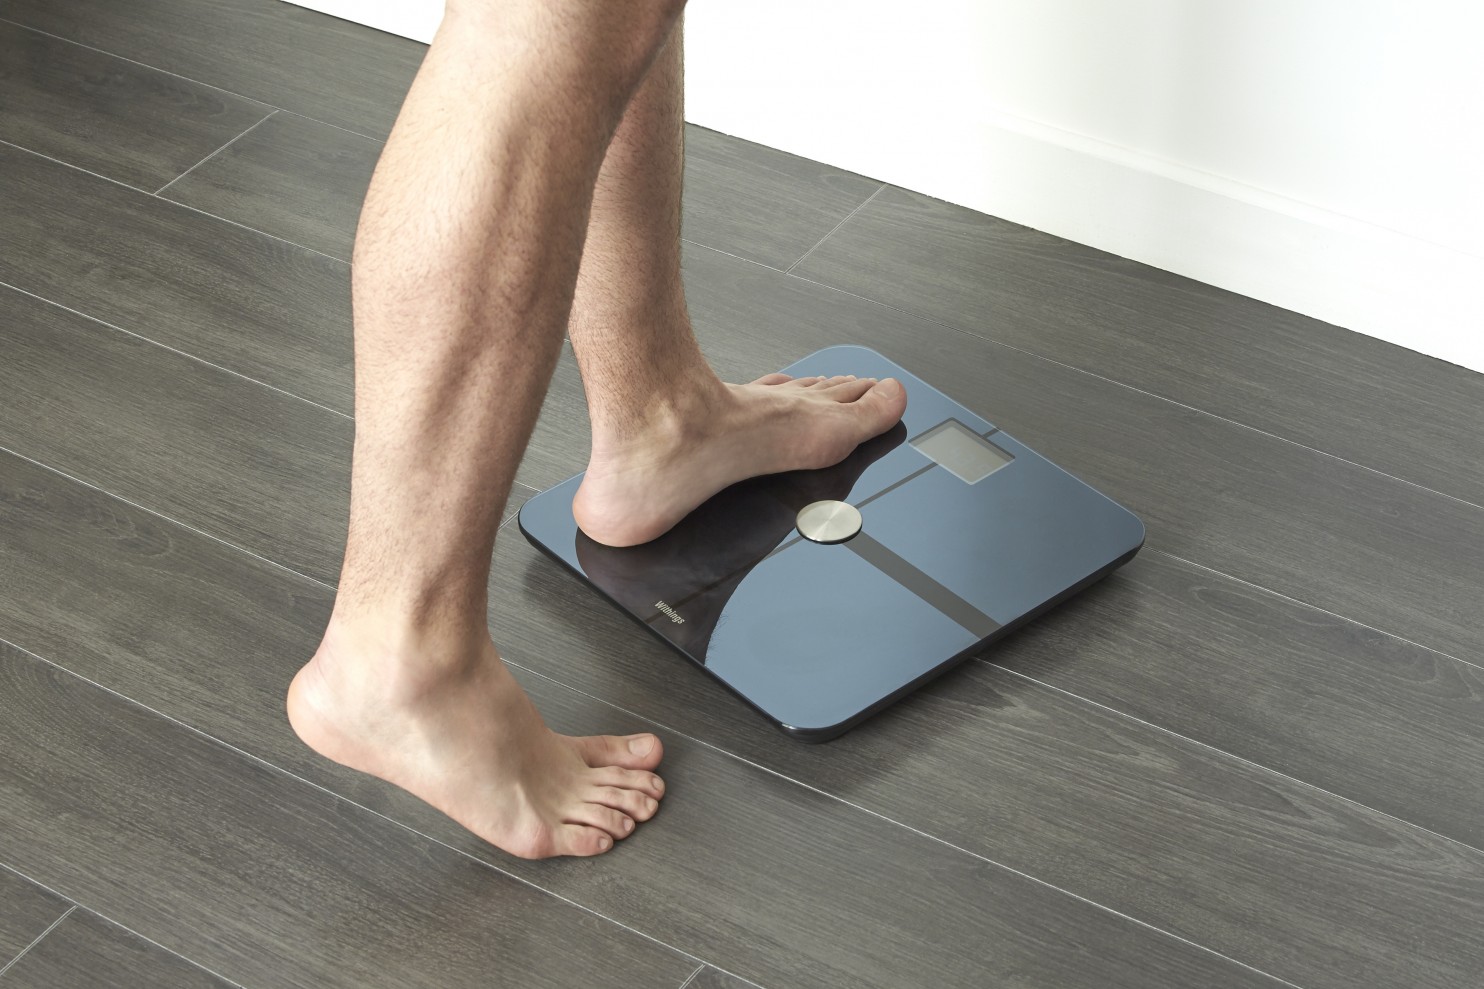 Image of a man stepping on a digital scale to measure weight